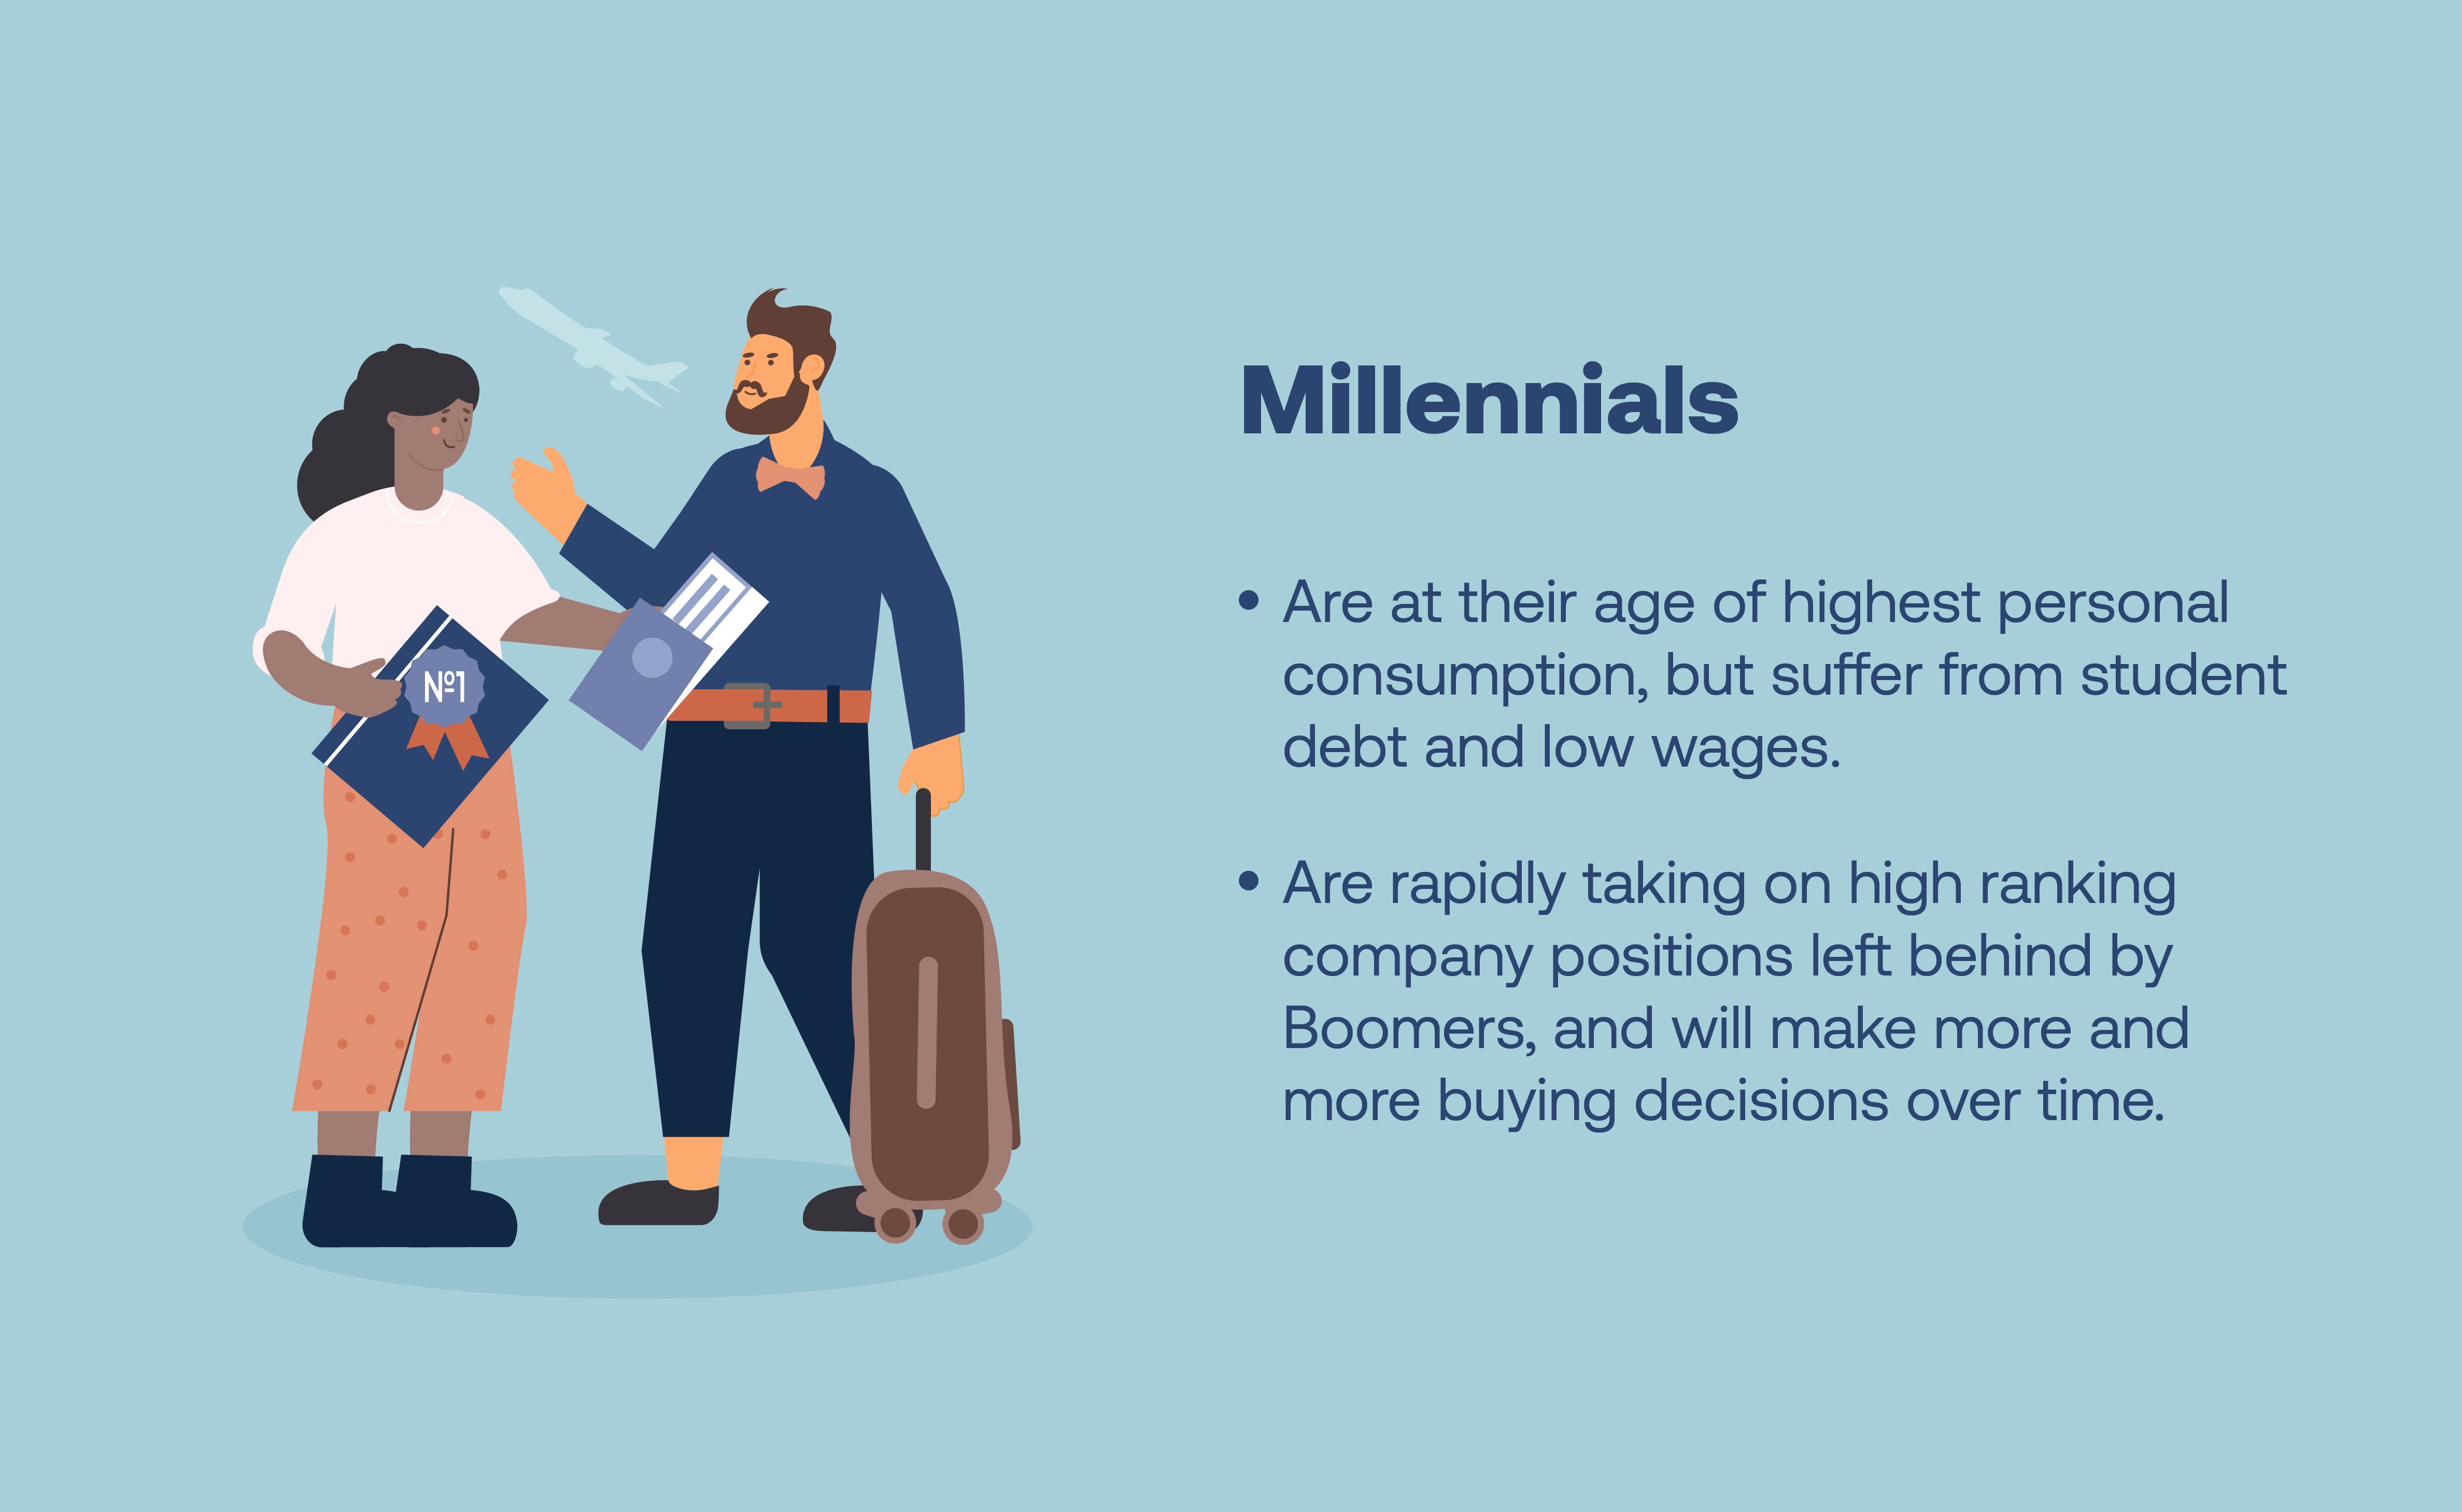 millennial generation at their highest personal consumption age